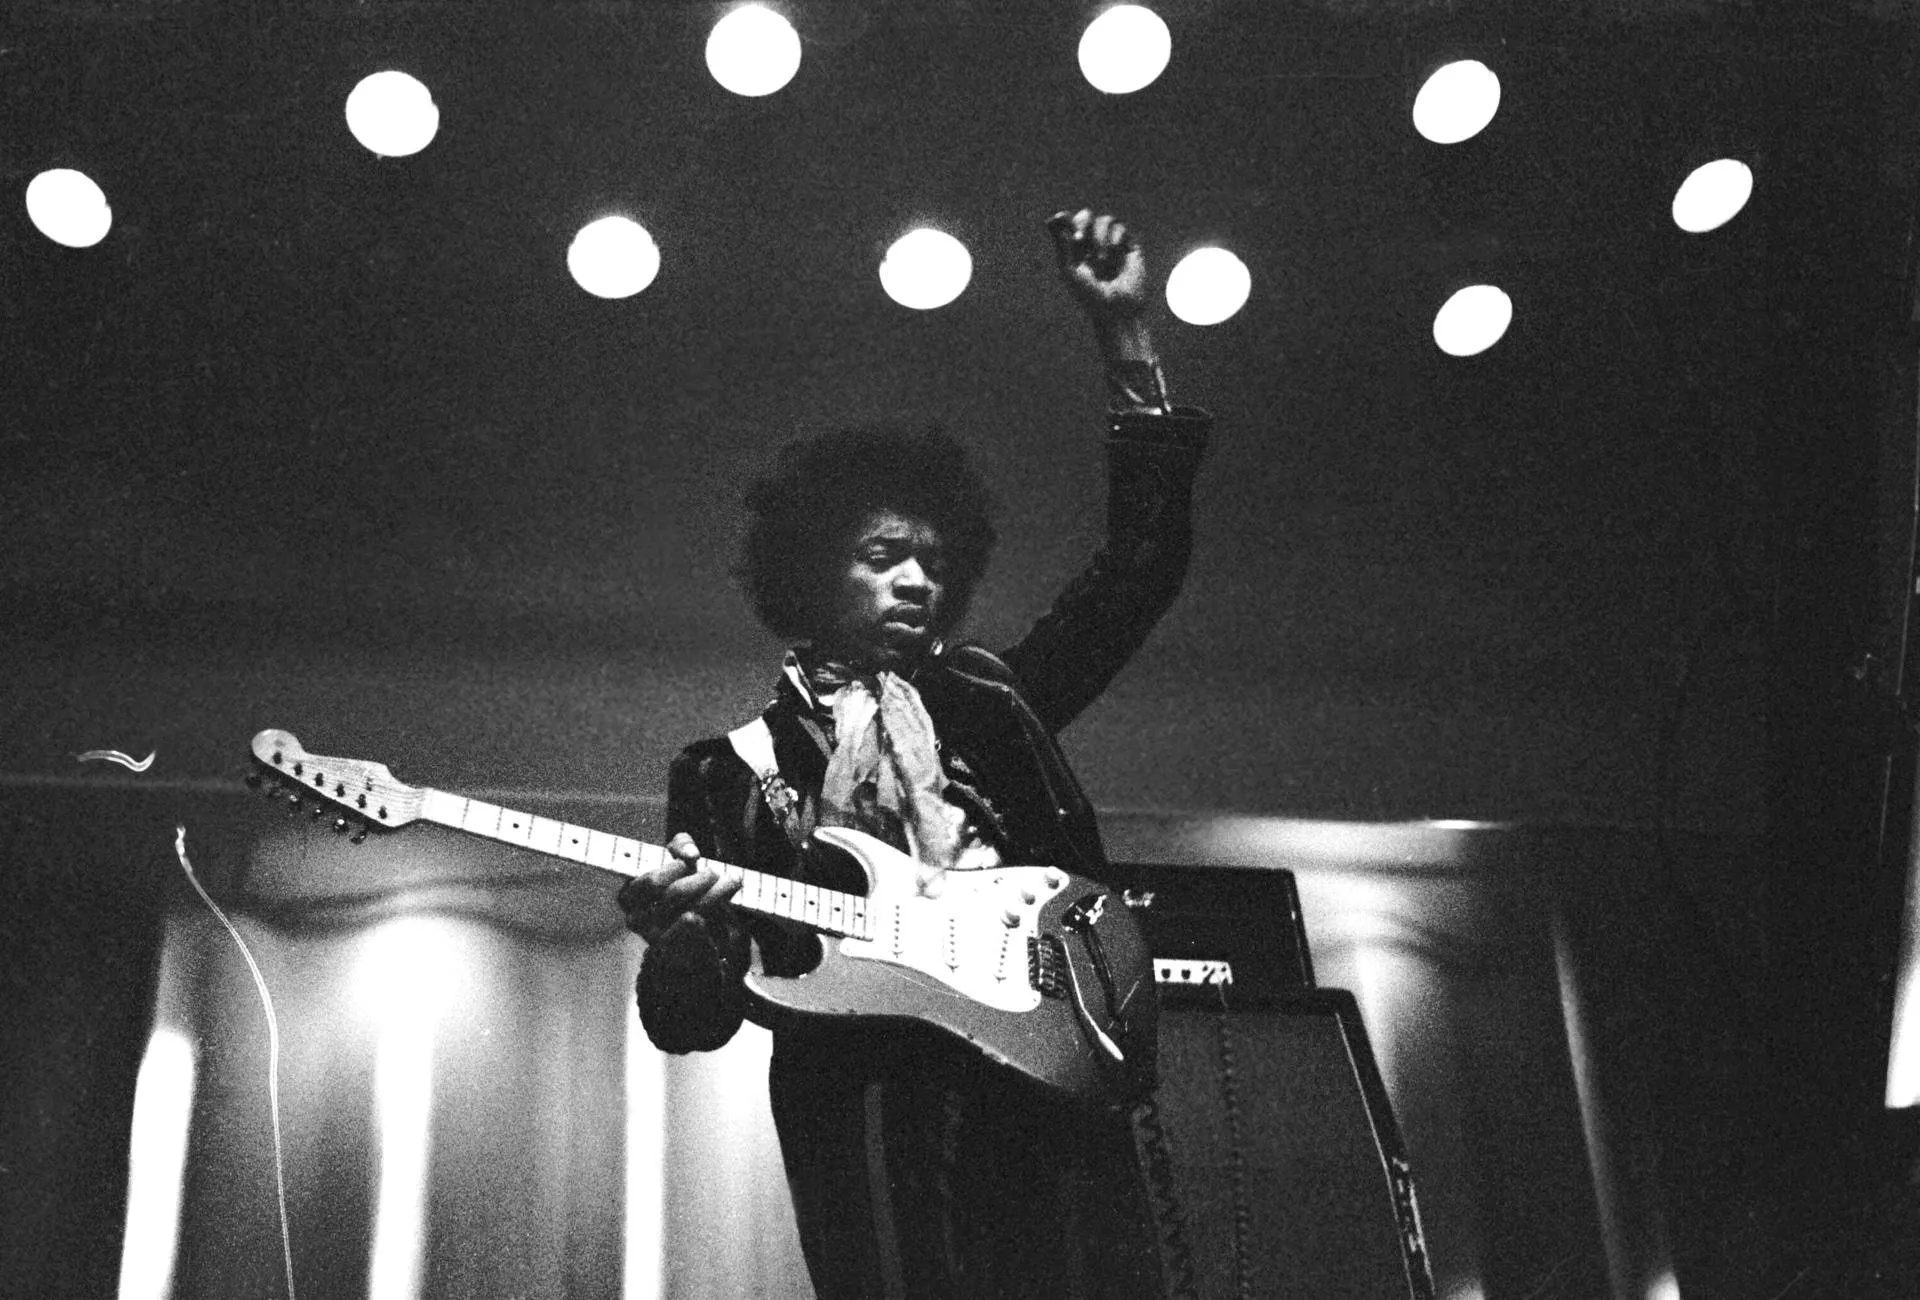 The Jimi Hendrix Experience performed at the Culture House in Helsinki.